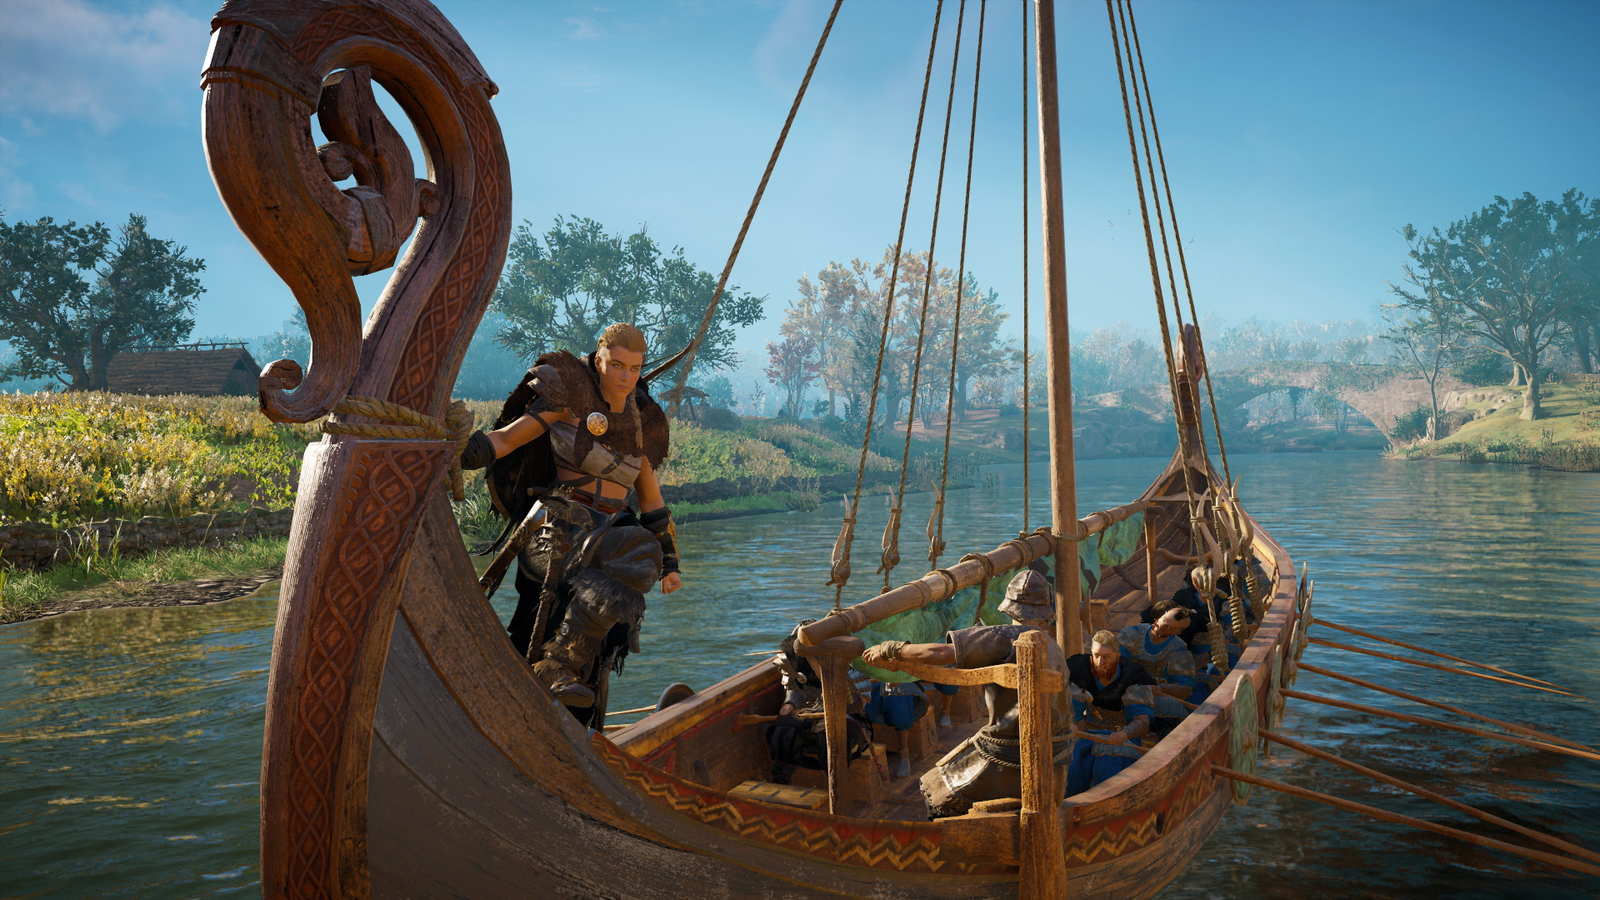 Assassin's Creed Valhalla update adds a new difficulty mode and